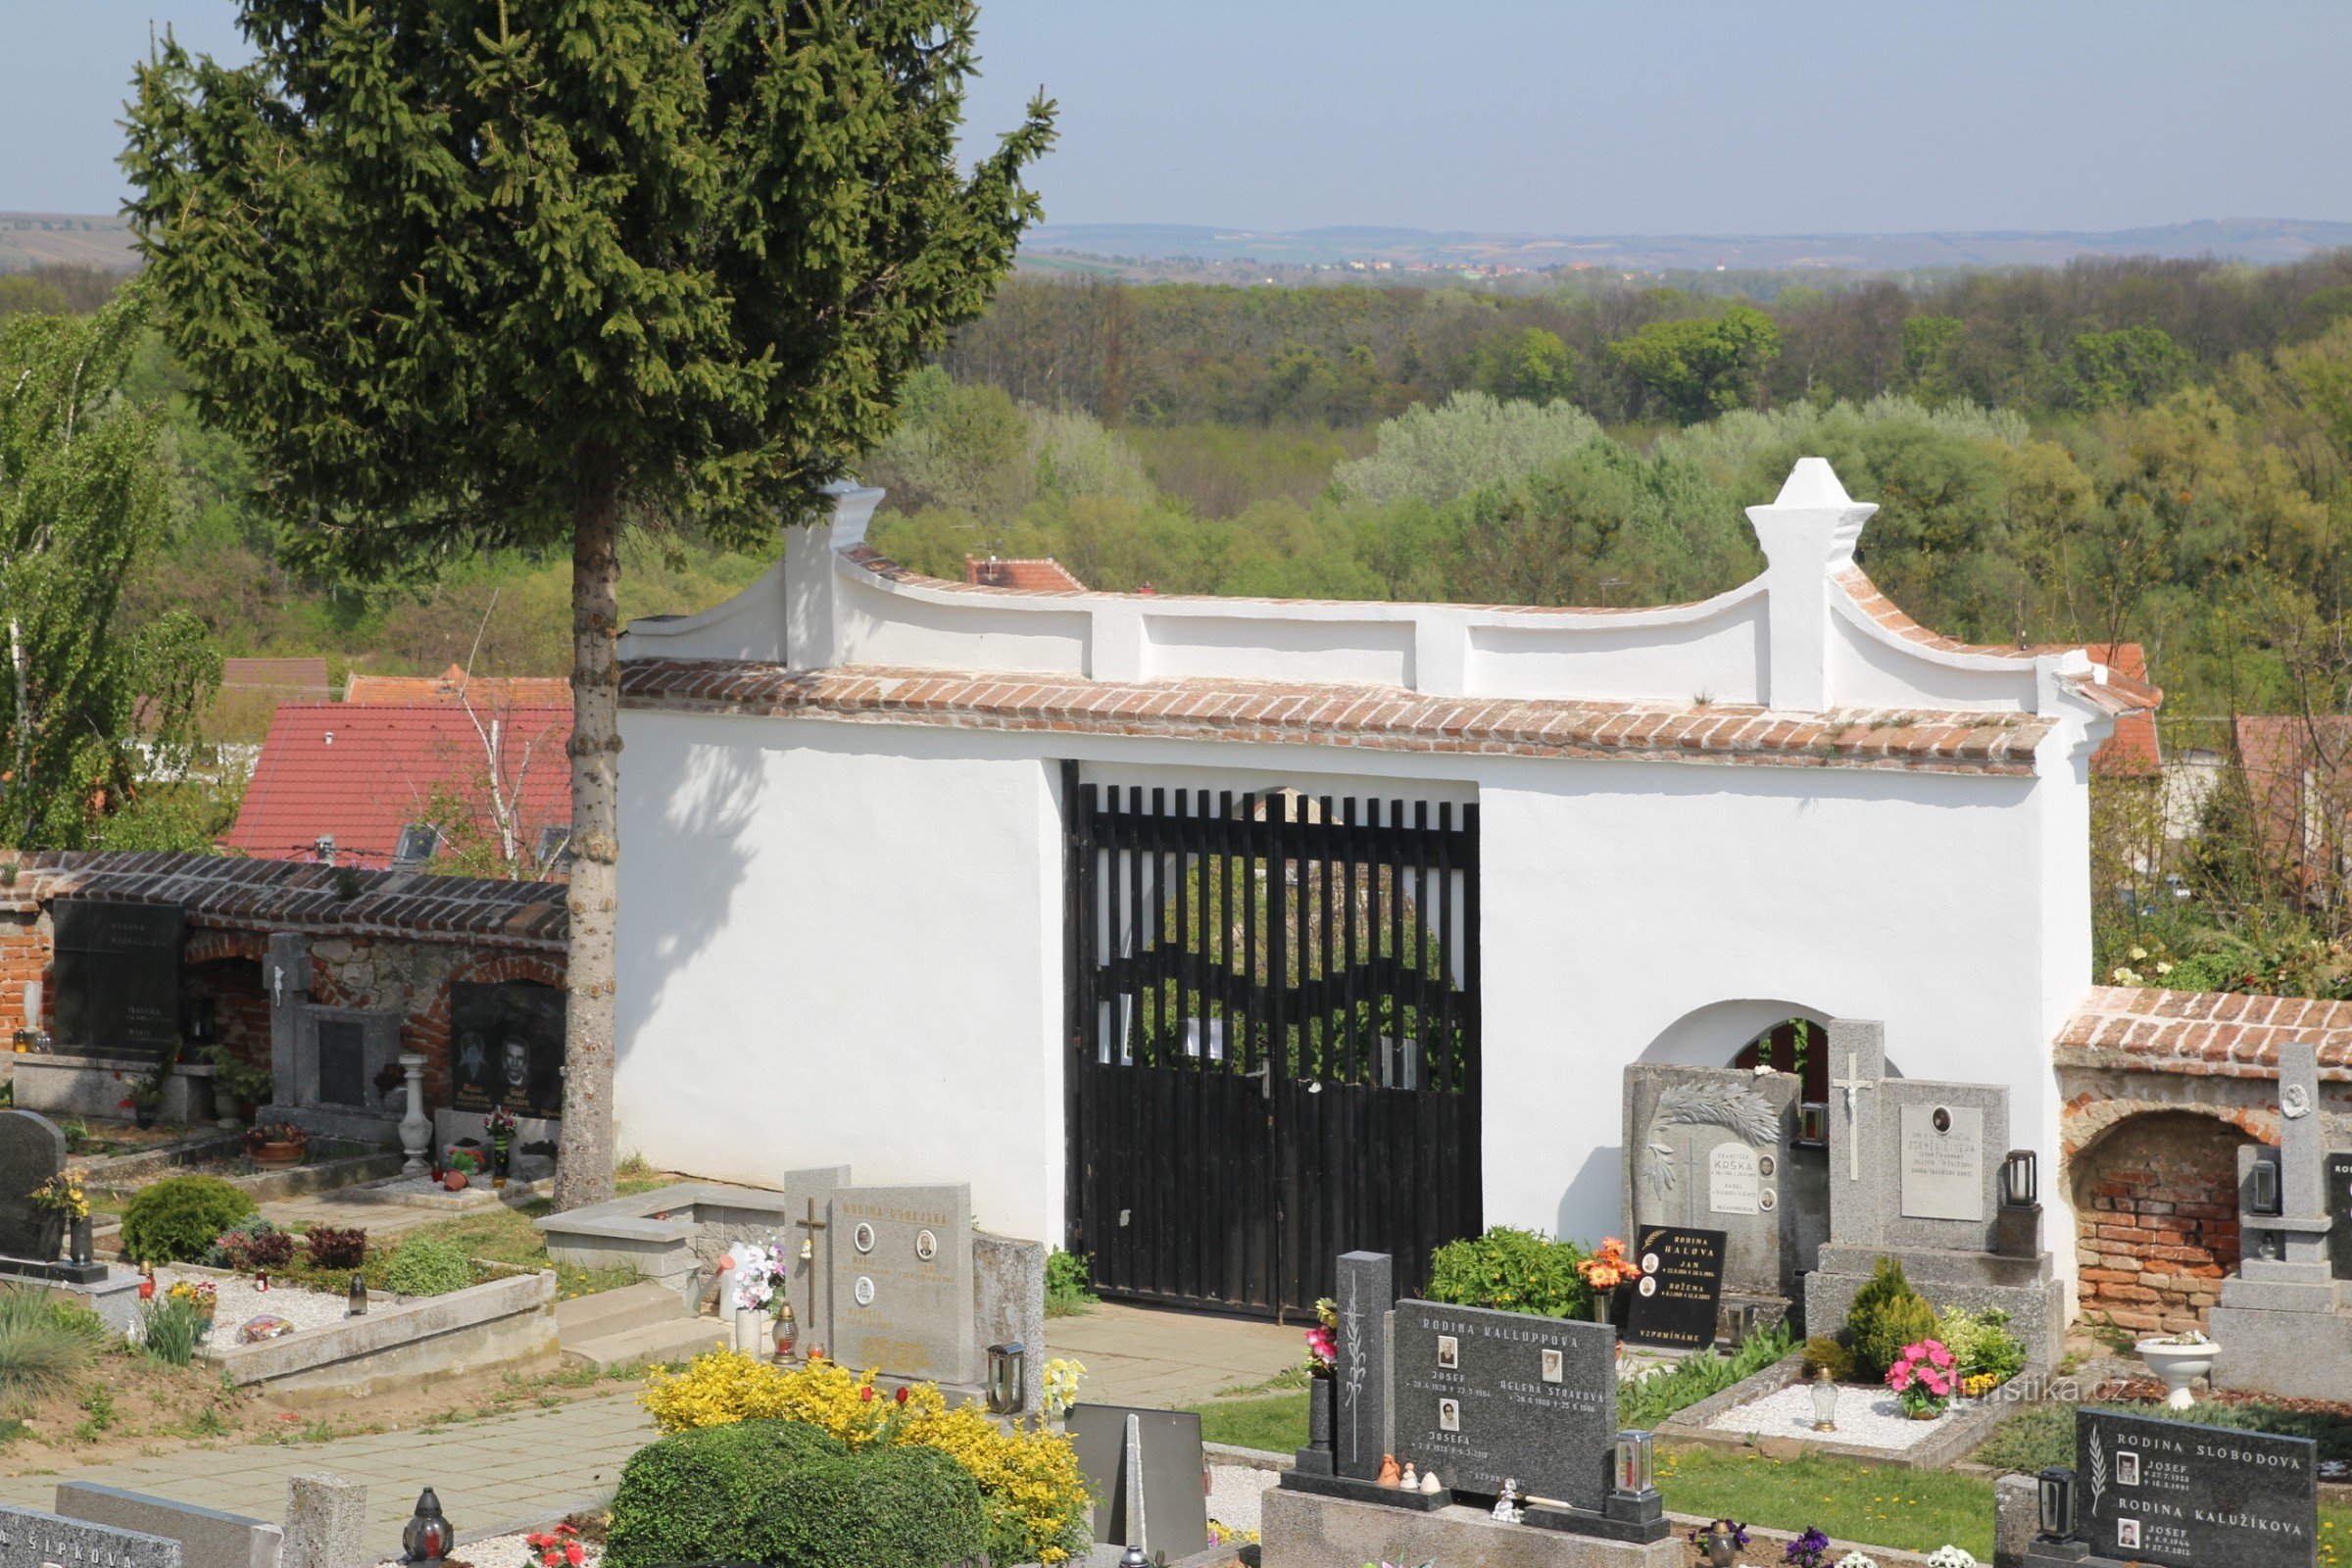 Entrance gate and cemetery wall from the inner part